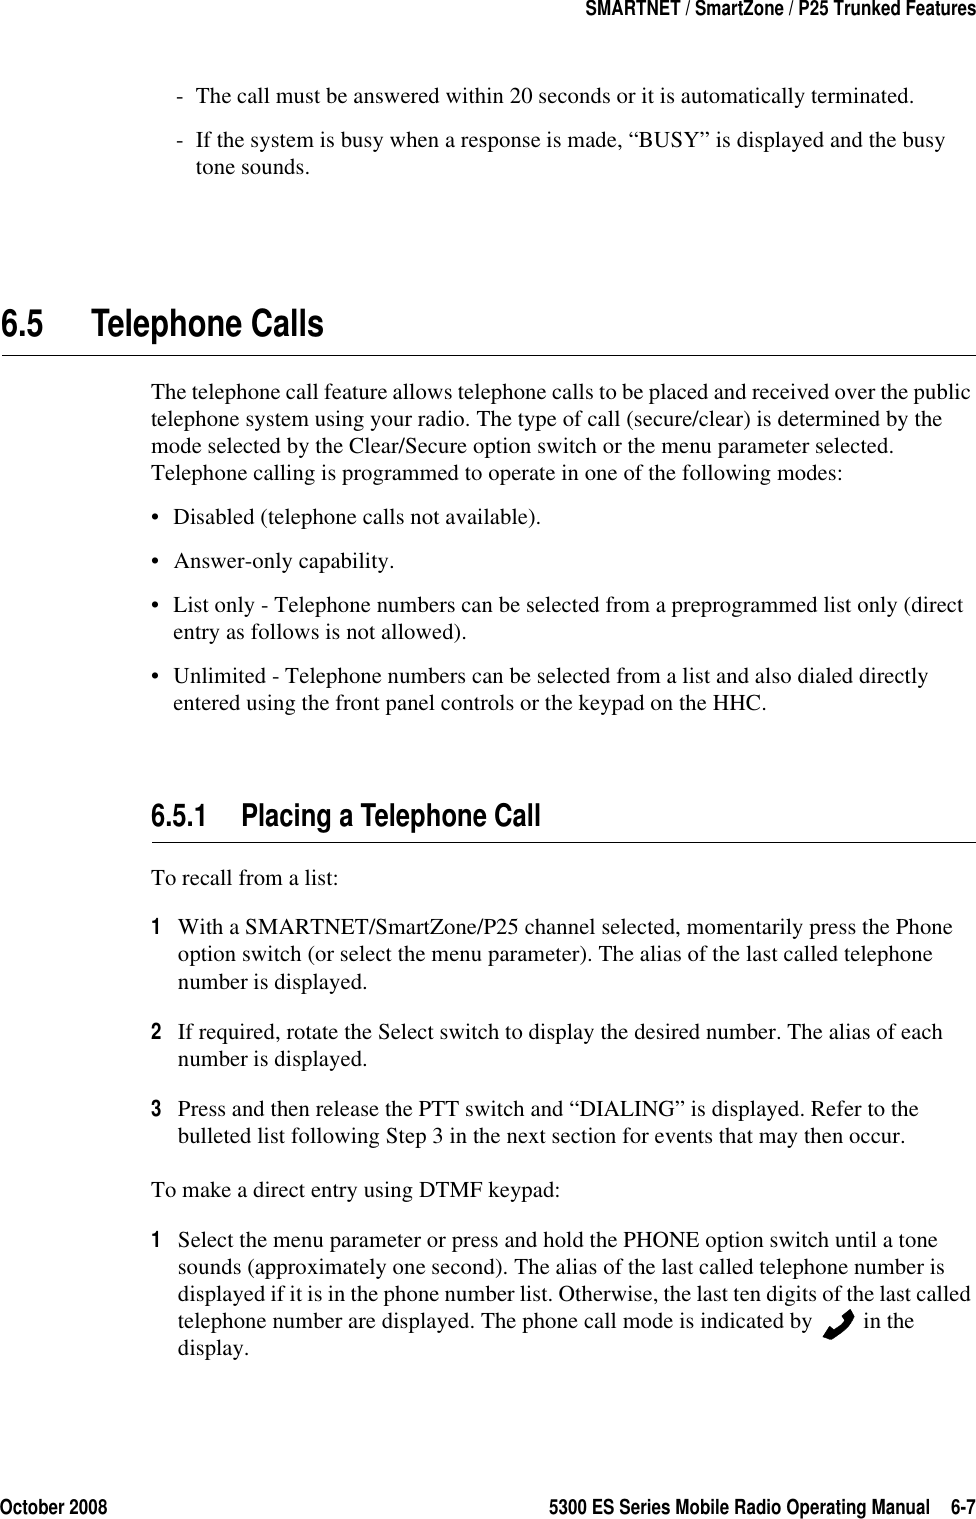 October 2008 5300 ES Series Mobile Radio Operating Manual 6-7SMARTNET / SmartZone / P25 Trunked Features- The call must be answered within 20 seconds or it is automatically terminated.- If the system is busy when a response is made, “BUSY” is displayed and the busy tone sounds.6.5 Telephone CallsThe telephone call feature allows telephone calls to be placed and received over the public telephone system using your radio. The type of call (secure/clear) is determined by the mode selected by the Clear/Secure option switch or the menu parameter selected. Telephone calling is programmed to operate in one of the following modes:• Disabled (telephone calls not available).• Answer-only capability.• List only - Telephone numbers can be selected from a preprogrammed list only (direct entry as follows is not allowed).• Unlimited - Telephone numbers can be selected from a list and also dialed directly entered using the front panel controls or the keypad on the HHC.6.5.1 Placing a Telephone CallTo recall from a list:1With a SMARTNET/SmartZone/P25 channel selected, momentarily press the Phone option switch (or select the menu parameter). The alias of the last called telephone number is displayed.2If required, rotate the Select switch to display the desired number. The alias of each number is displayed.3Press and then release the PTT switch and “DIALING” is displayed. Refer to the bulleted list following Step 3 in the next section for events that may then occur.To make a direct entry using DTMF keypad:1Select the menu parameter or press and hold the PHONE option switch until a tone sounds (approximately one second). The alias of the last called telephone number is displayed if it is in the phone number list. Otherwise, the last ten digits of the last called telephone number are displayed. The phone call mode is indicated by   in the display.